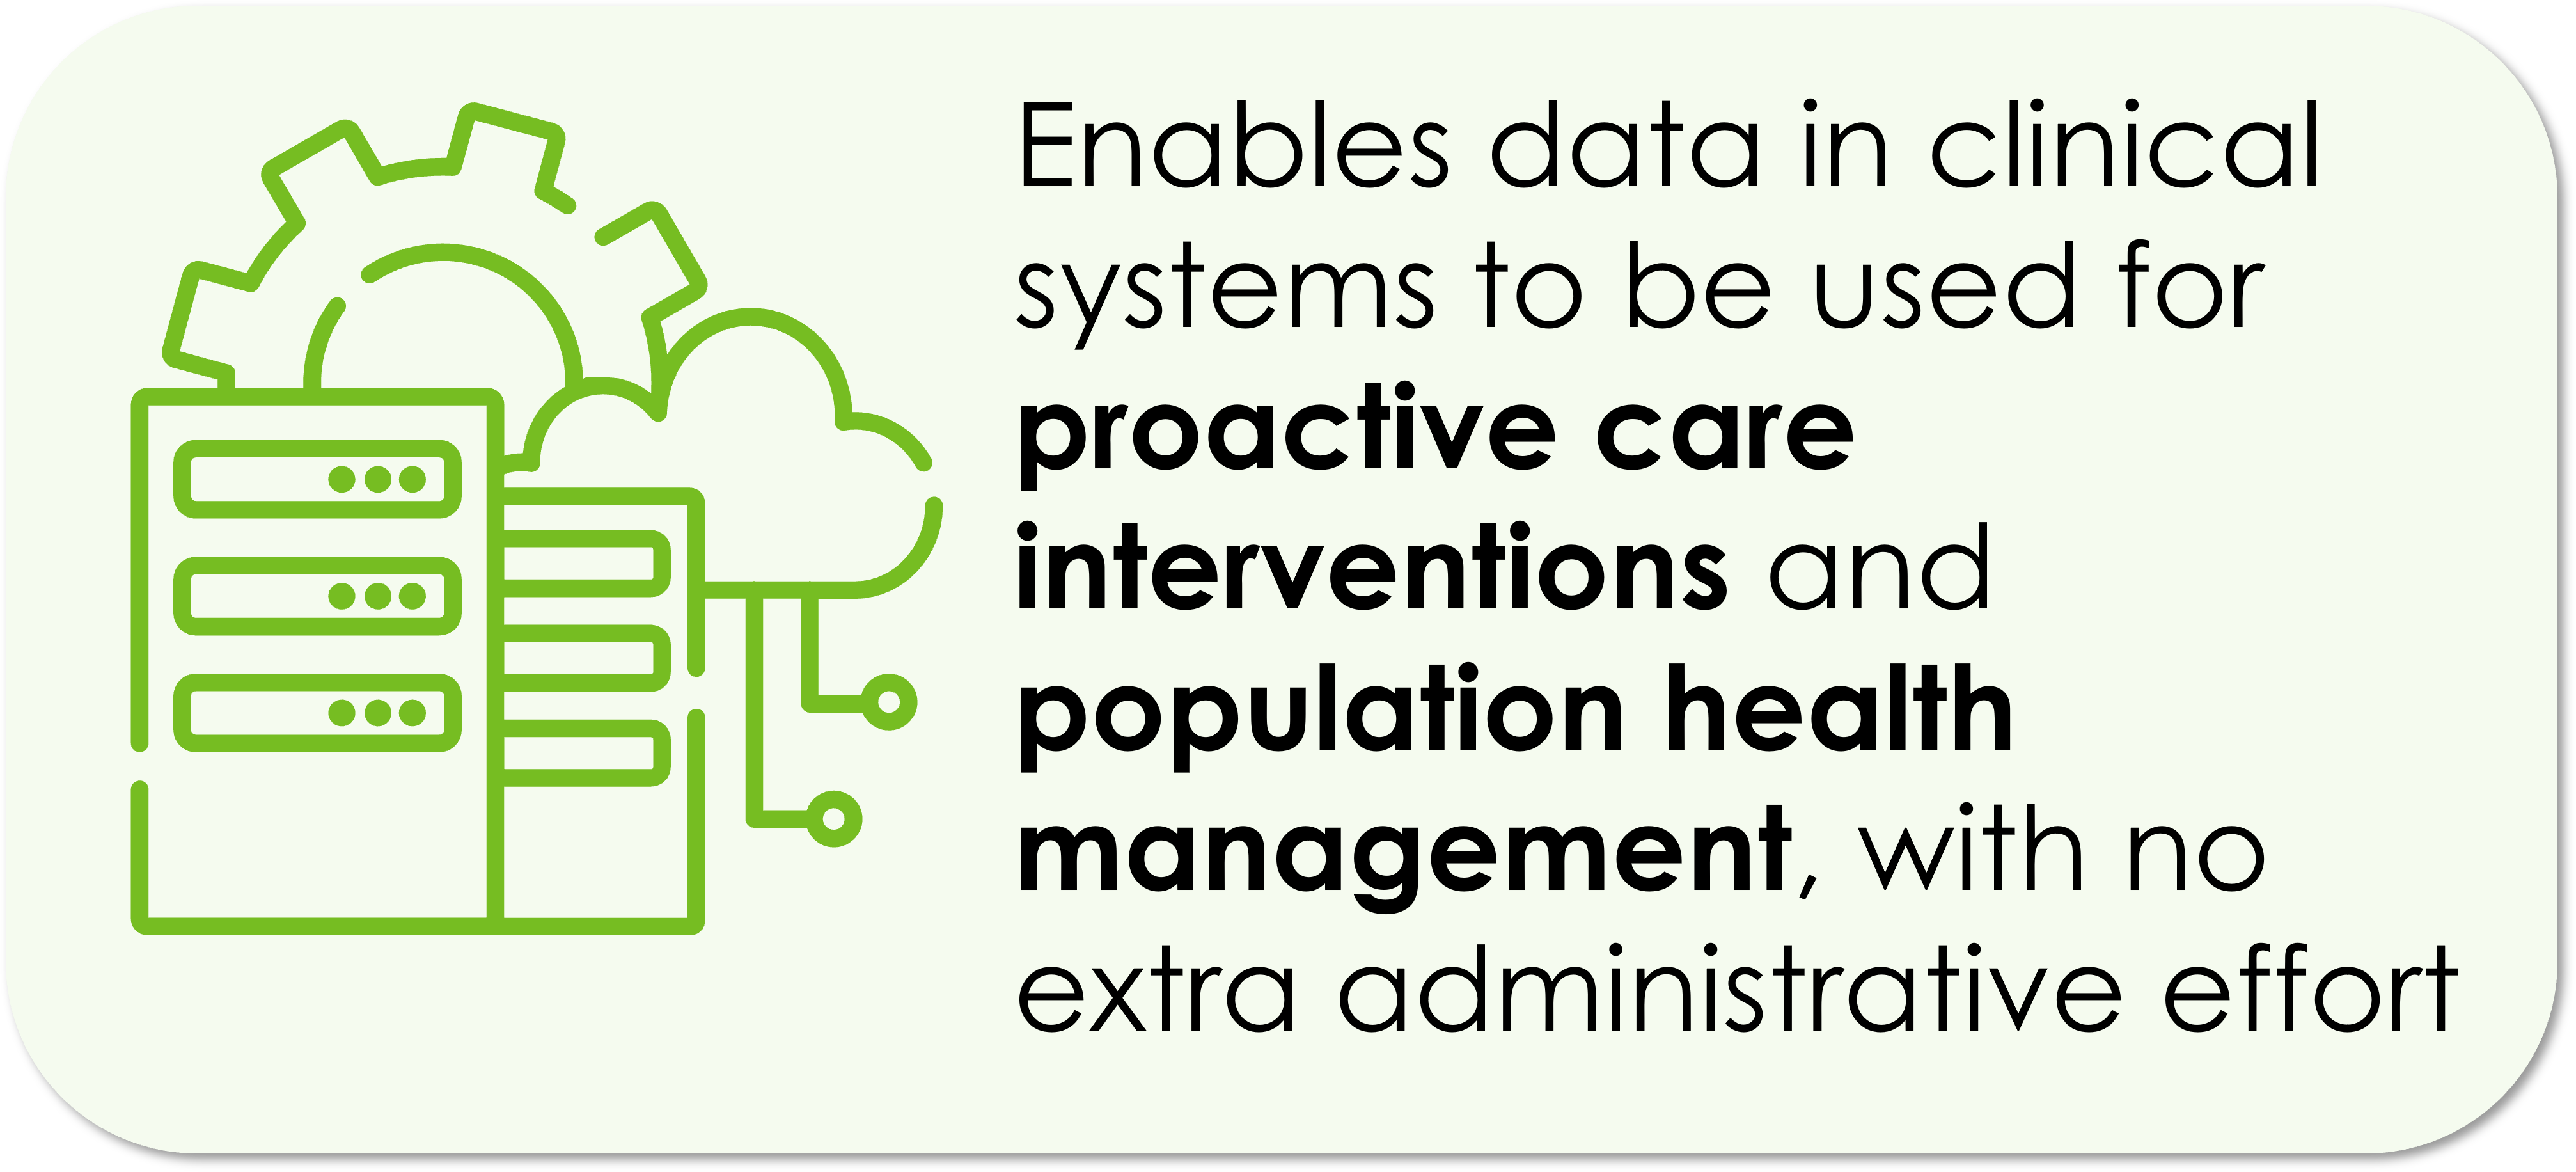 Enables data in clinical systems to be used for proactive care interventions and population health management, with no extra administrative effort